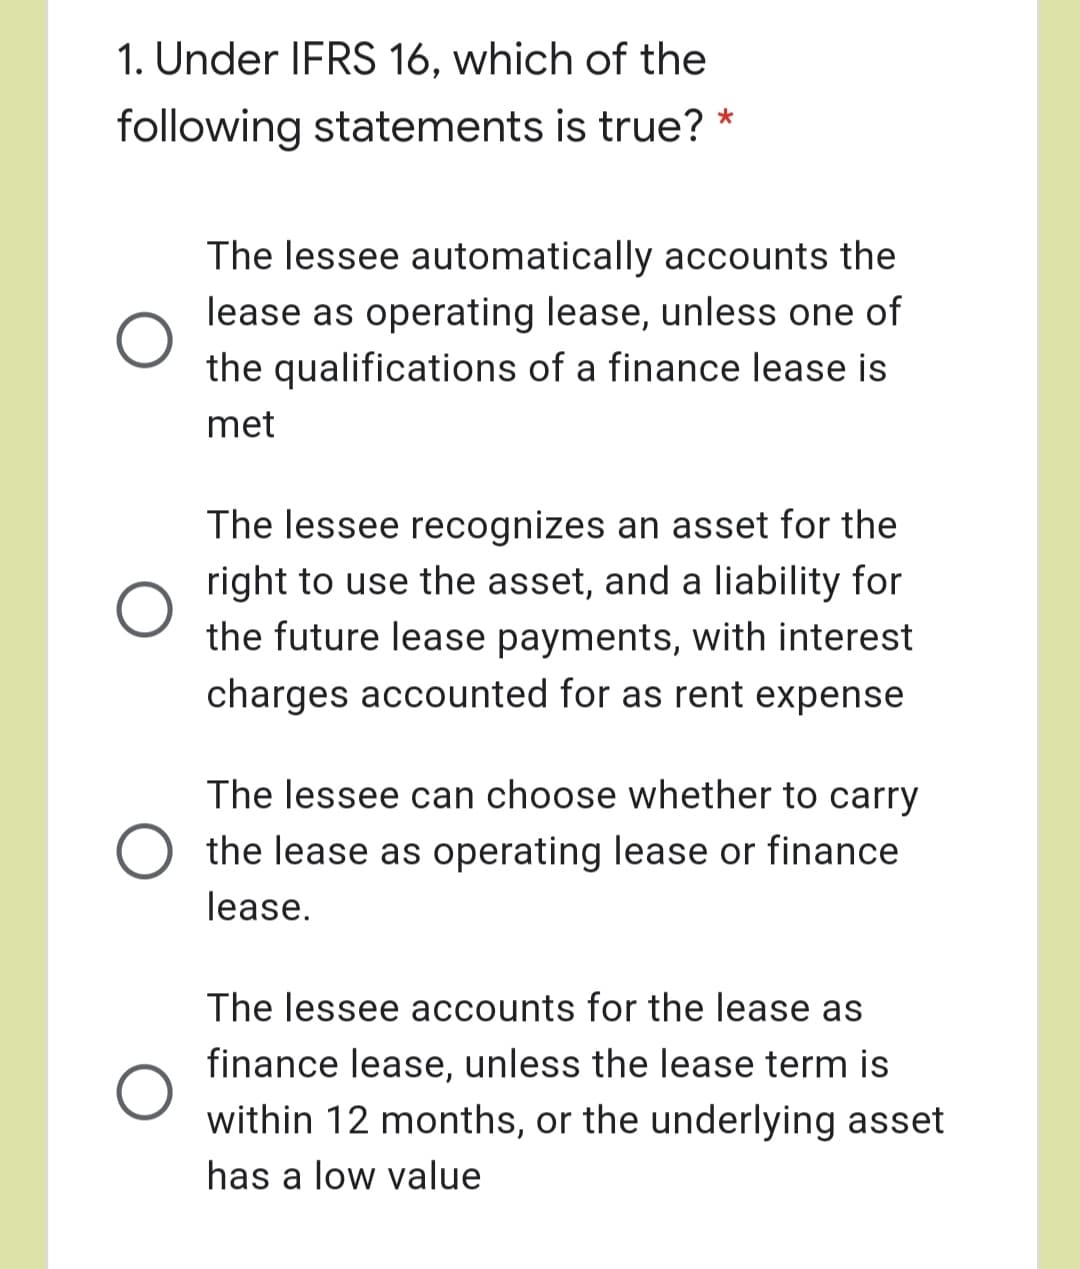 1. Under IFRS 16, which of the
following statements is true?
*
The lessee automatically accounts the
lease as operating lease, unless one of
the qualifications of a finance lease is
met
The lessee recognizes an asset for the
right to use the asset, and a liability for
the future lease payments, with interest
charges accounted for as rent expense
The lessee can choose whether to carry
the lease as operating lease or finance
lease.
The lessee accounts for the lease as
finance lease, unless the lease term is
within 12 months, or the underlying asset
has a low value
